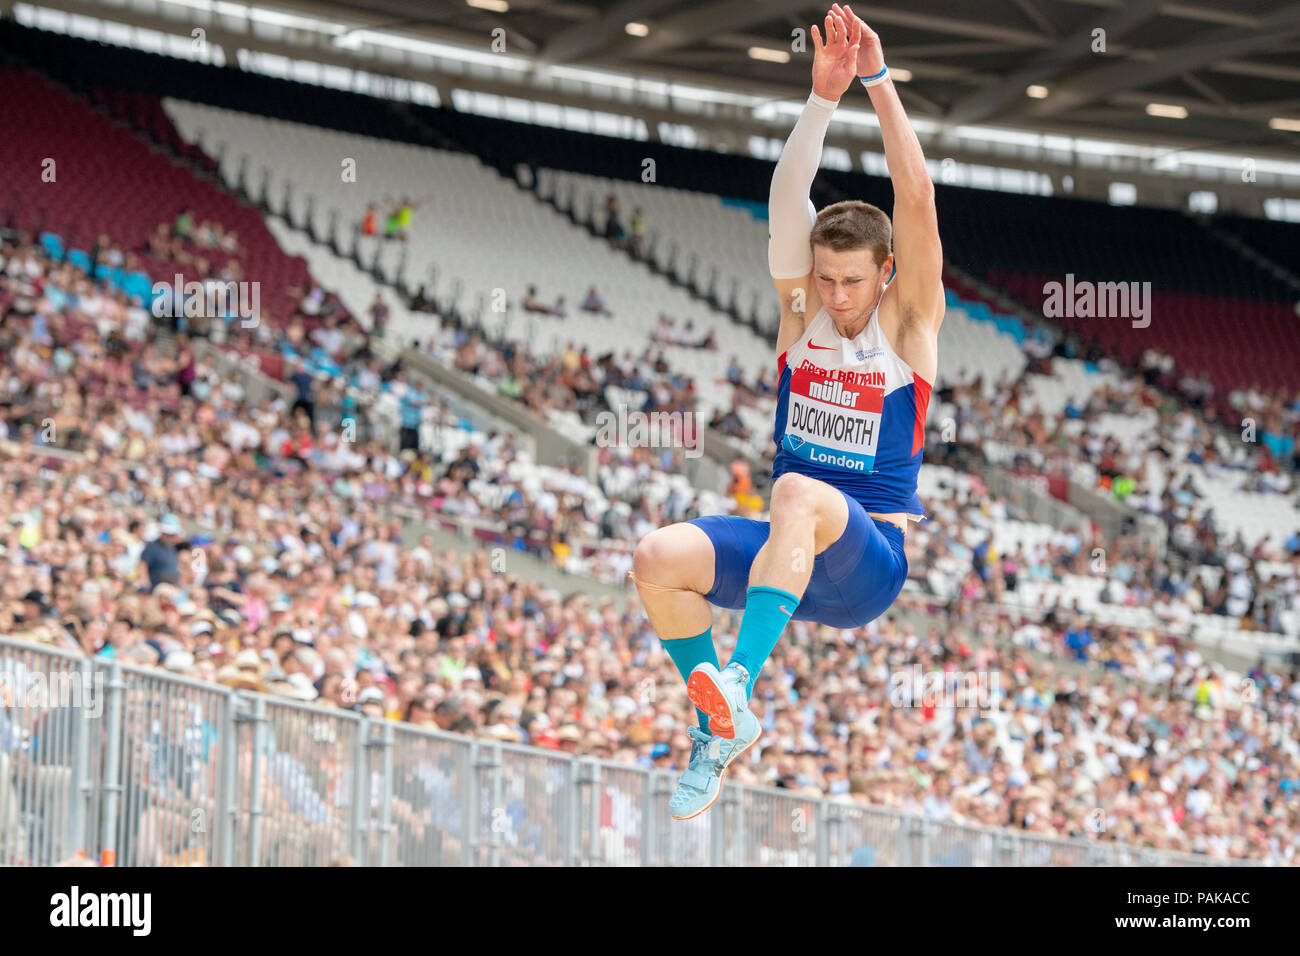 London, UK. 22nd July 2018. Tim Duckworth (GBR) competes in the long jump at the Muller Anniversary Games at the London Stadium, London, Great Britiain, on 22 July 2018. Credit: Andrew Peat/Alamy Live News Stock Photo